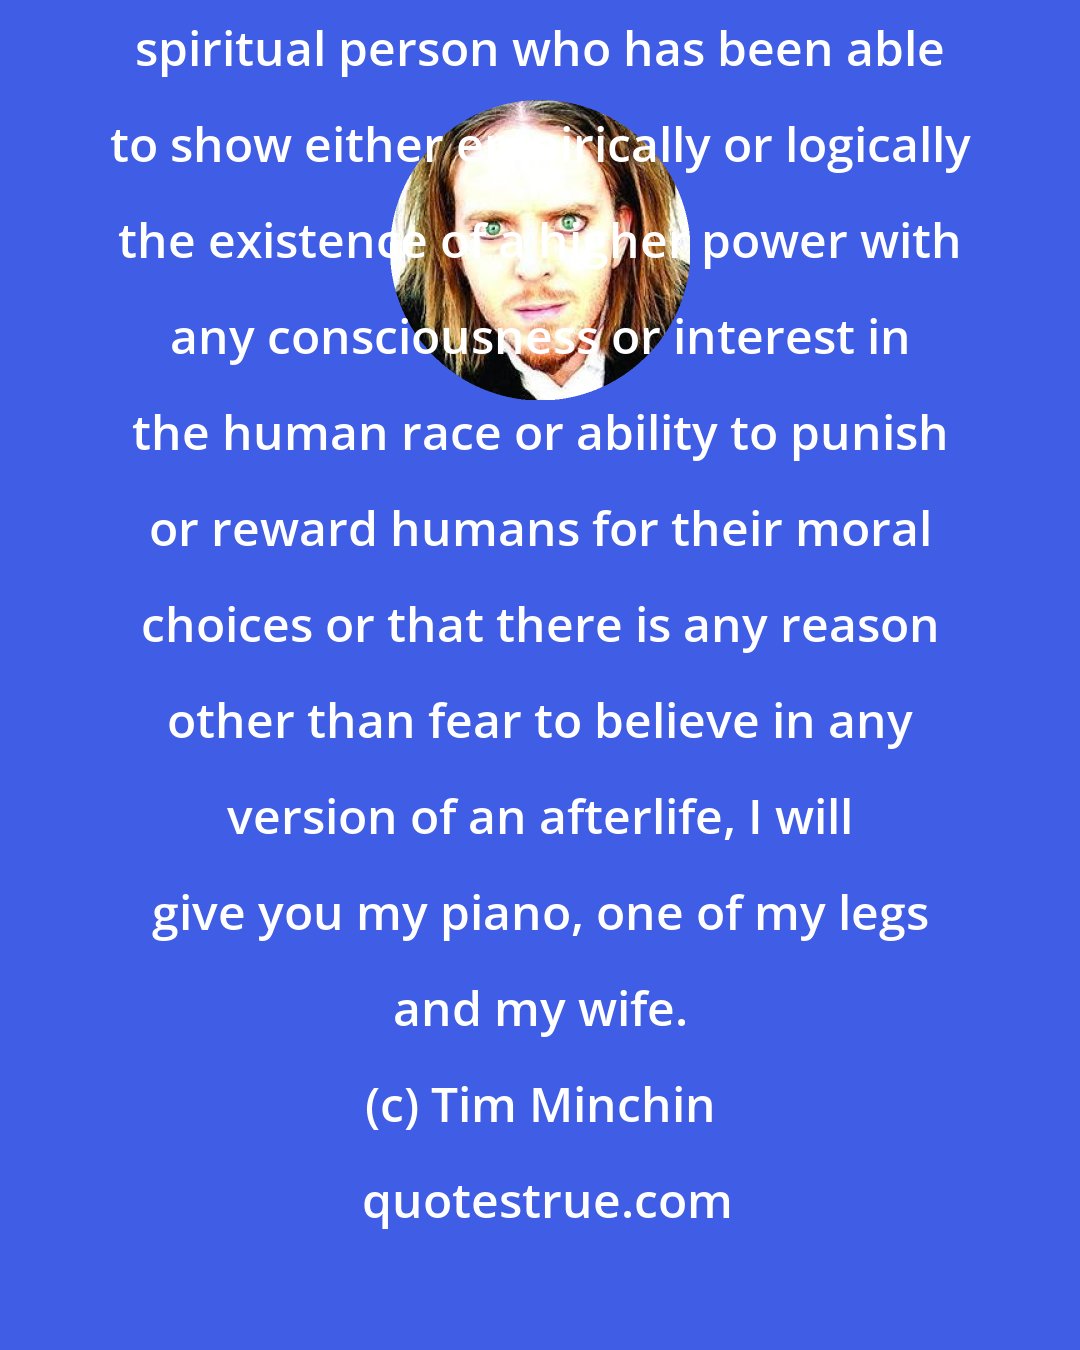 Tim Minchin: If anyone can show me one example in the history of the world of a single spiritual person who has been able to show either empirically or logically the existence of a higher power with any consciousness or interest in the human race or ability to punish or reward humans for their moral choices or that there is any reason other than fear to believe in any version of an afterlife, I will give you my piano, one of my legs and my wife.